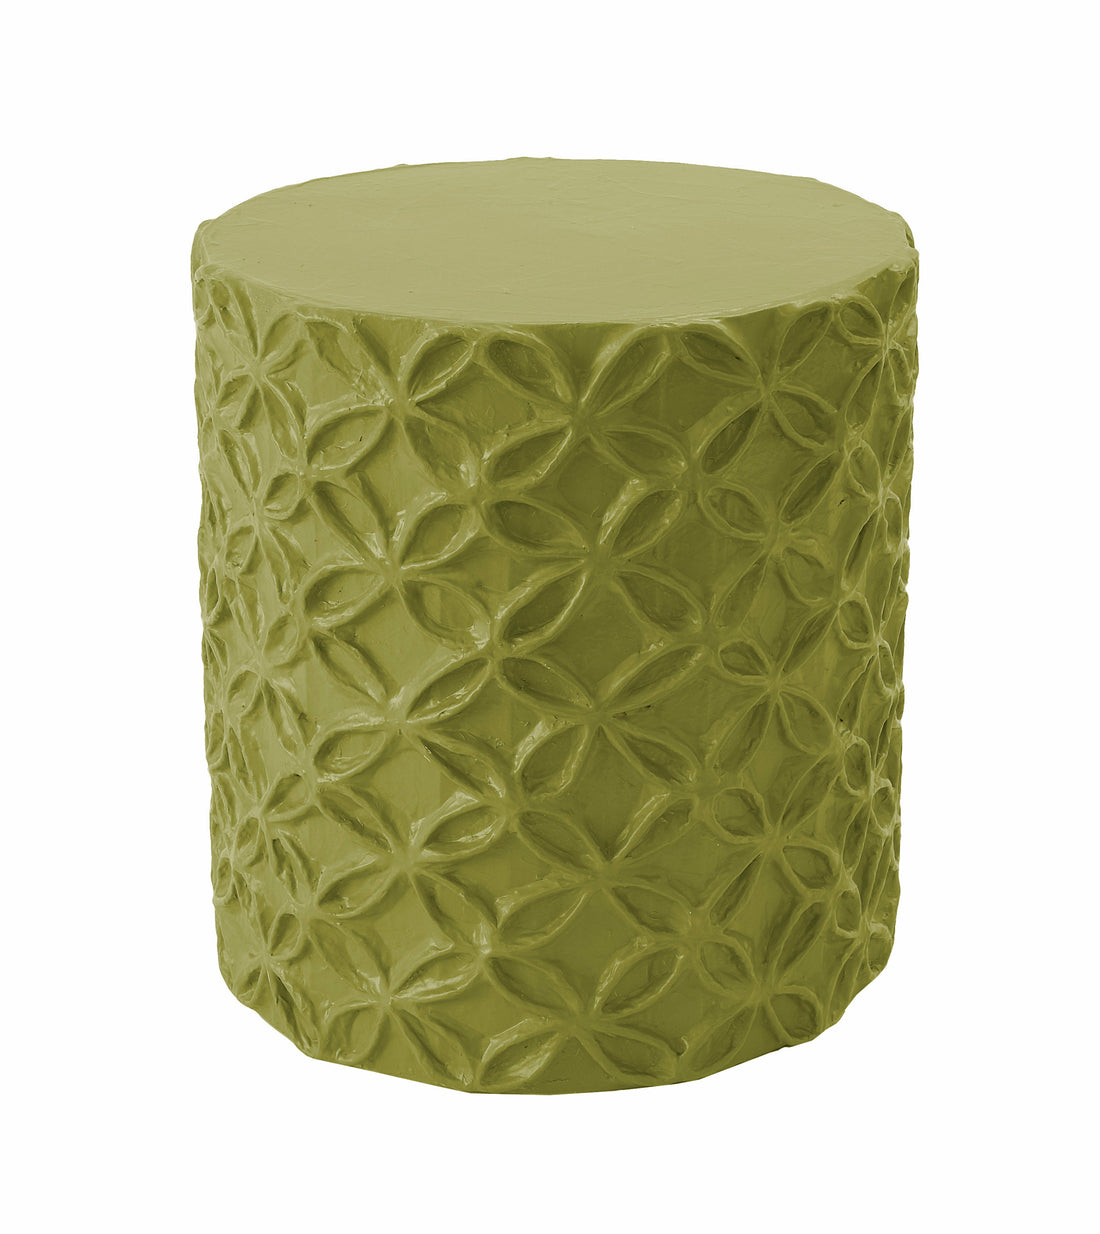 stool and accent table in lush green with floral relief